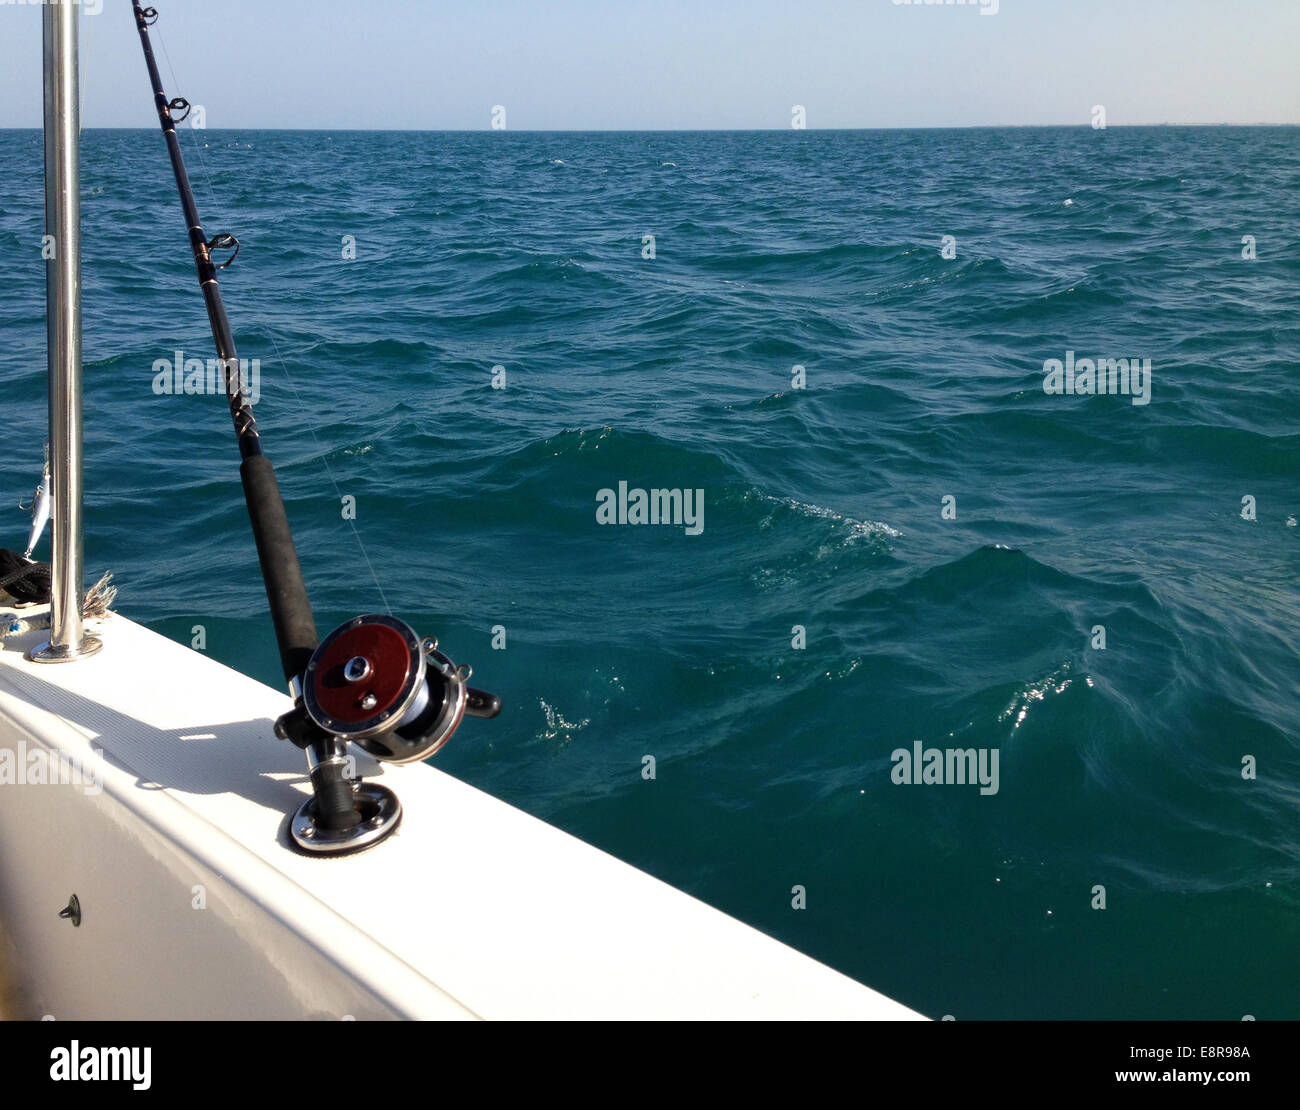 Big game fishing reels and rods in the ocean Stock Photo